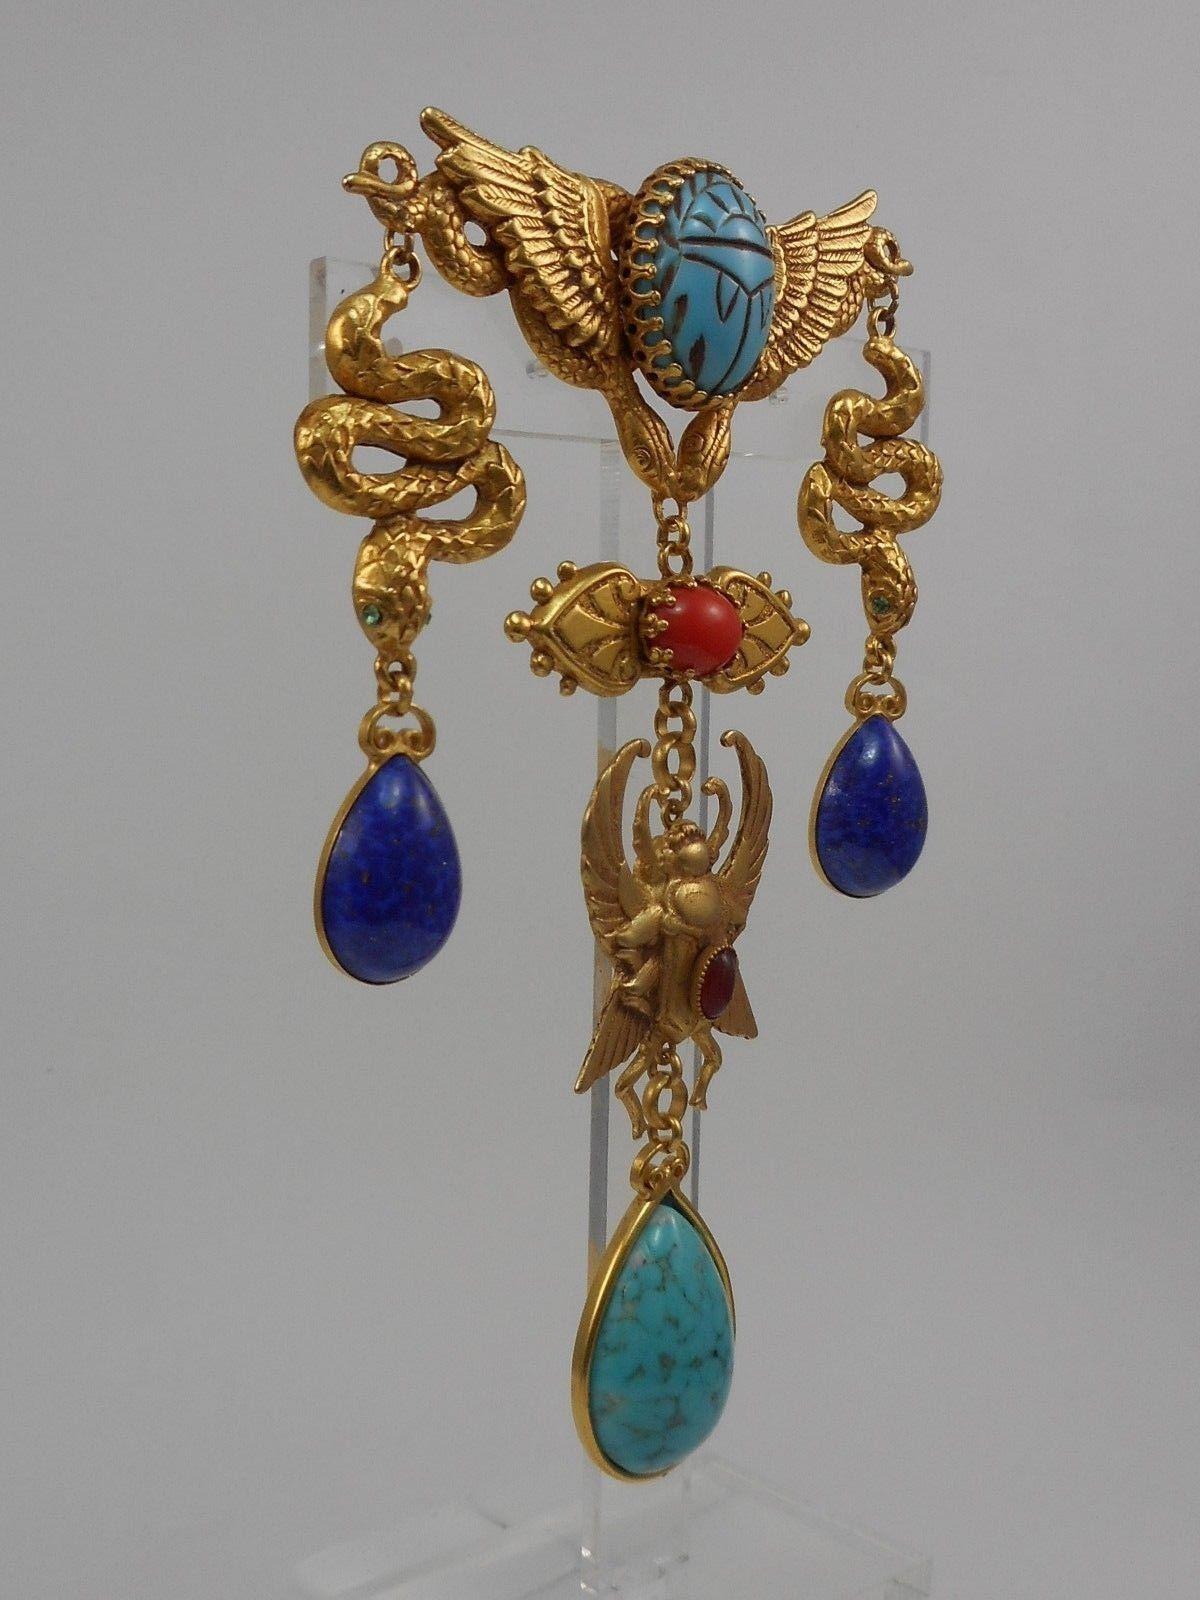 Fabulous Askew London Snake and Winged Scarab Egyptian Revival Drop Brooch; Winged bar set with a Scarab stone, suspending three drops- snakes with Lapis Lazuli Blue glass drops flanking a winged scarab with large Turquoise matrix pear shaped drop;